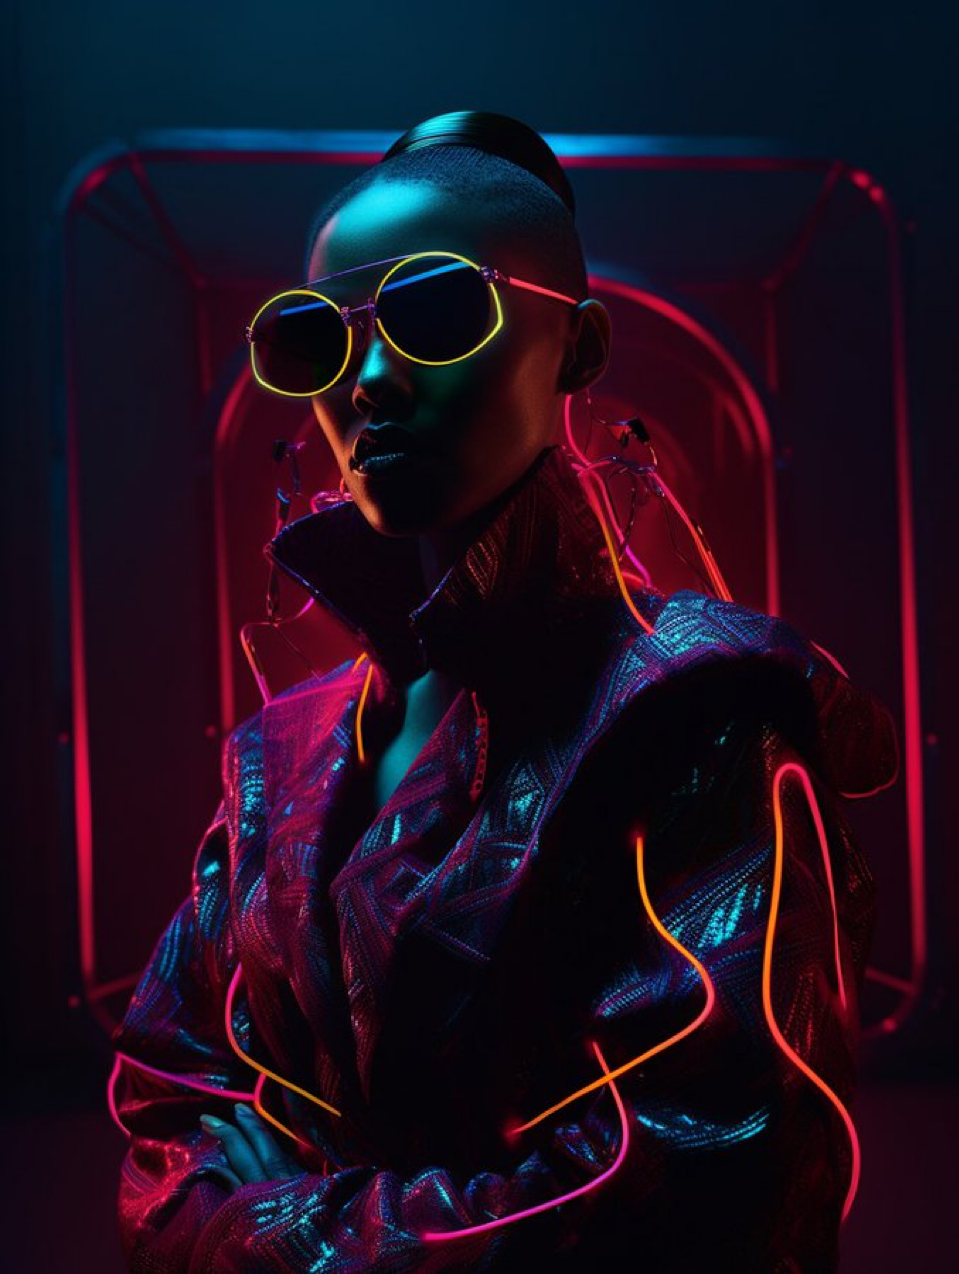 In this striking photograph by Tim Walker, a model stands with surreal oversized hiphop cyberpunk luxury clothing and detailed cyberpunk...